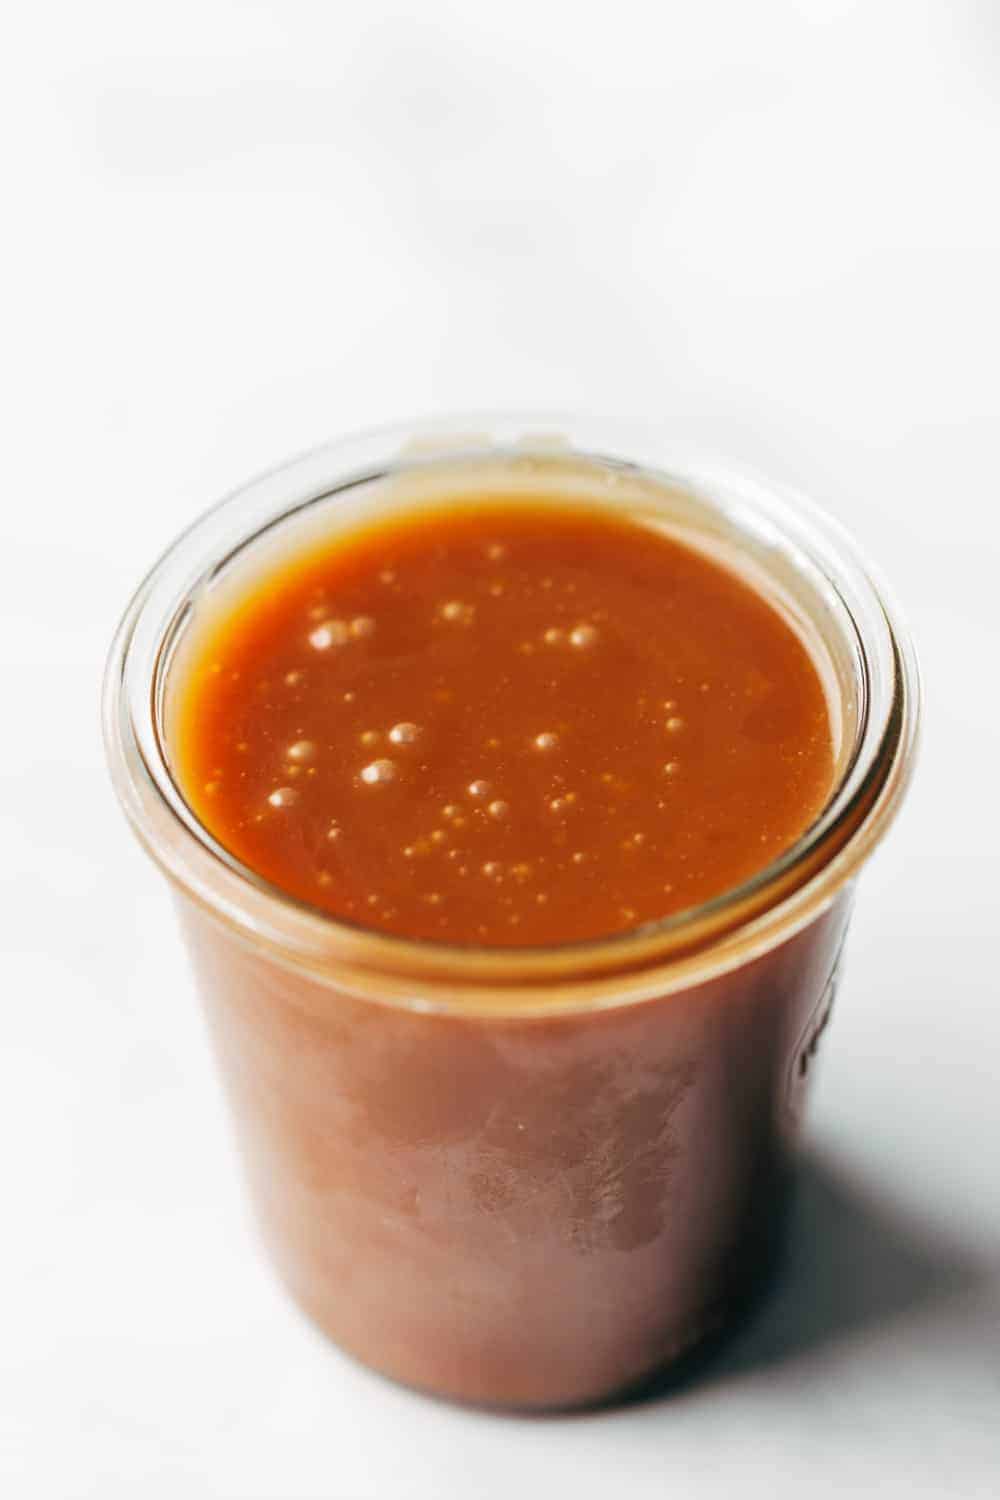 Learn how to make caramel sauce with just a few pantry staples